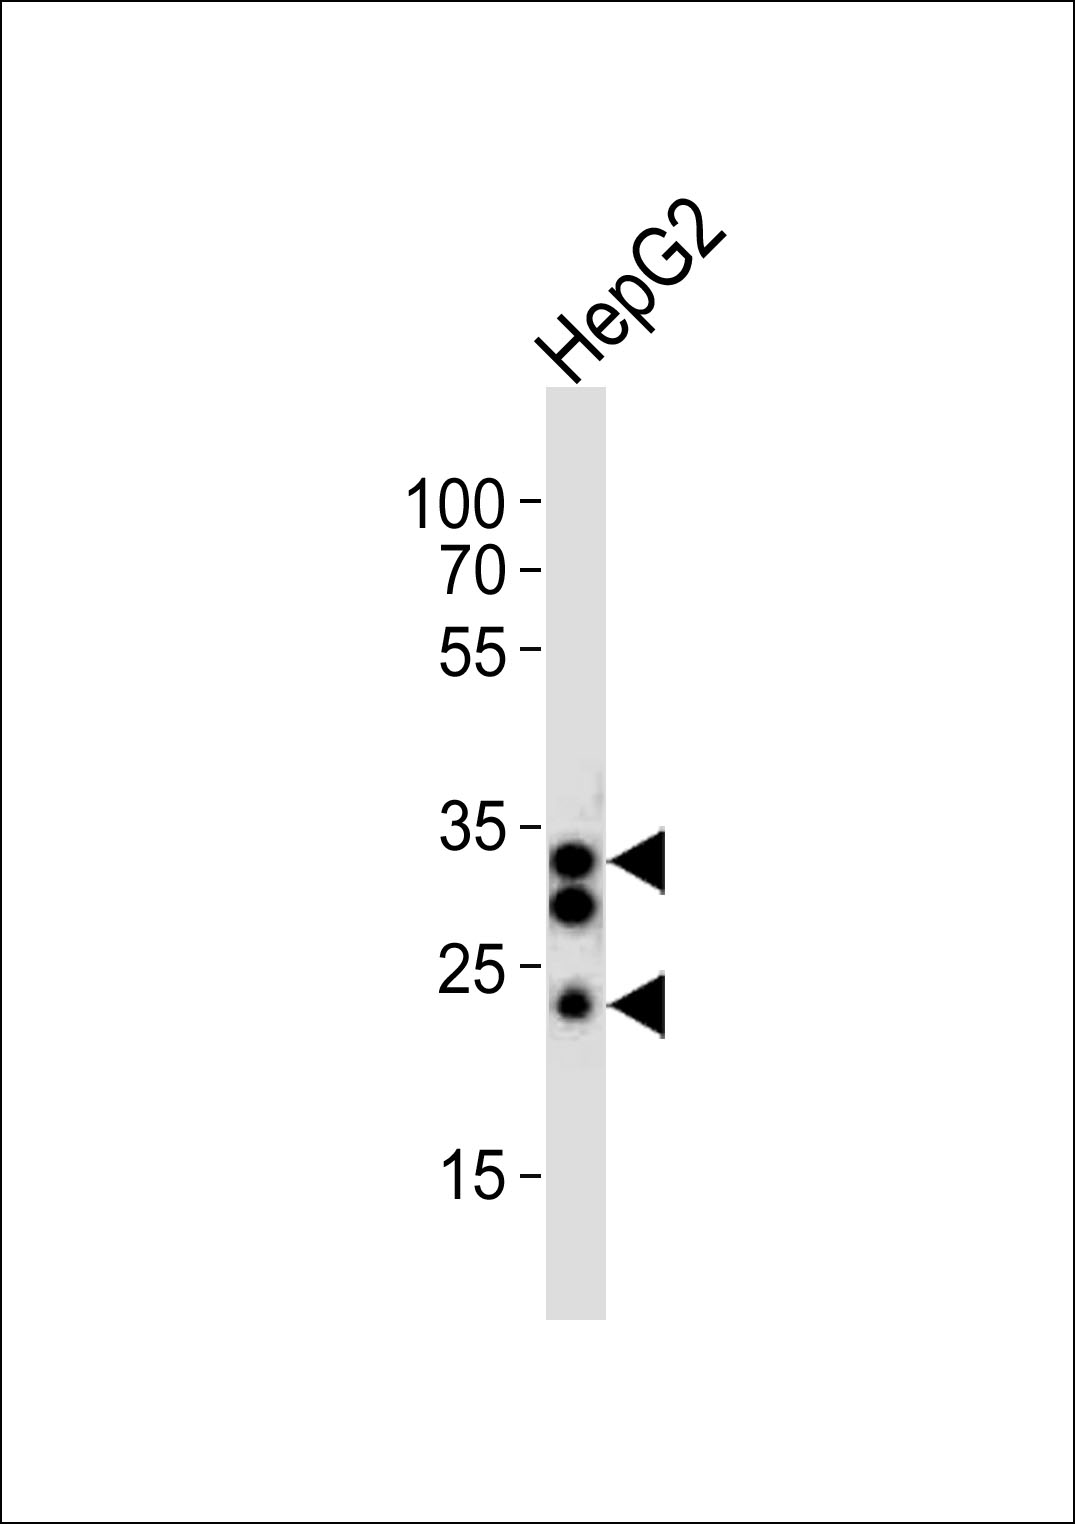 SULT1A1 Antibody - C-terminal region (OAAB18983) in HepG2 cell line using Western Blot